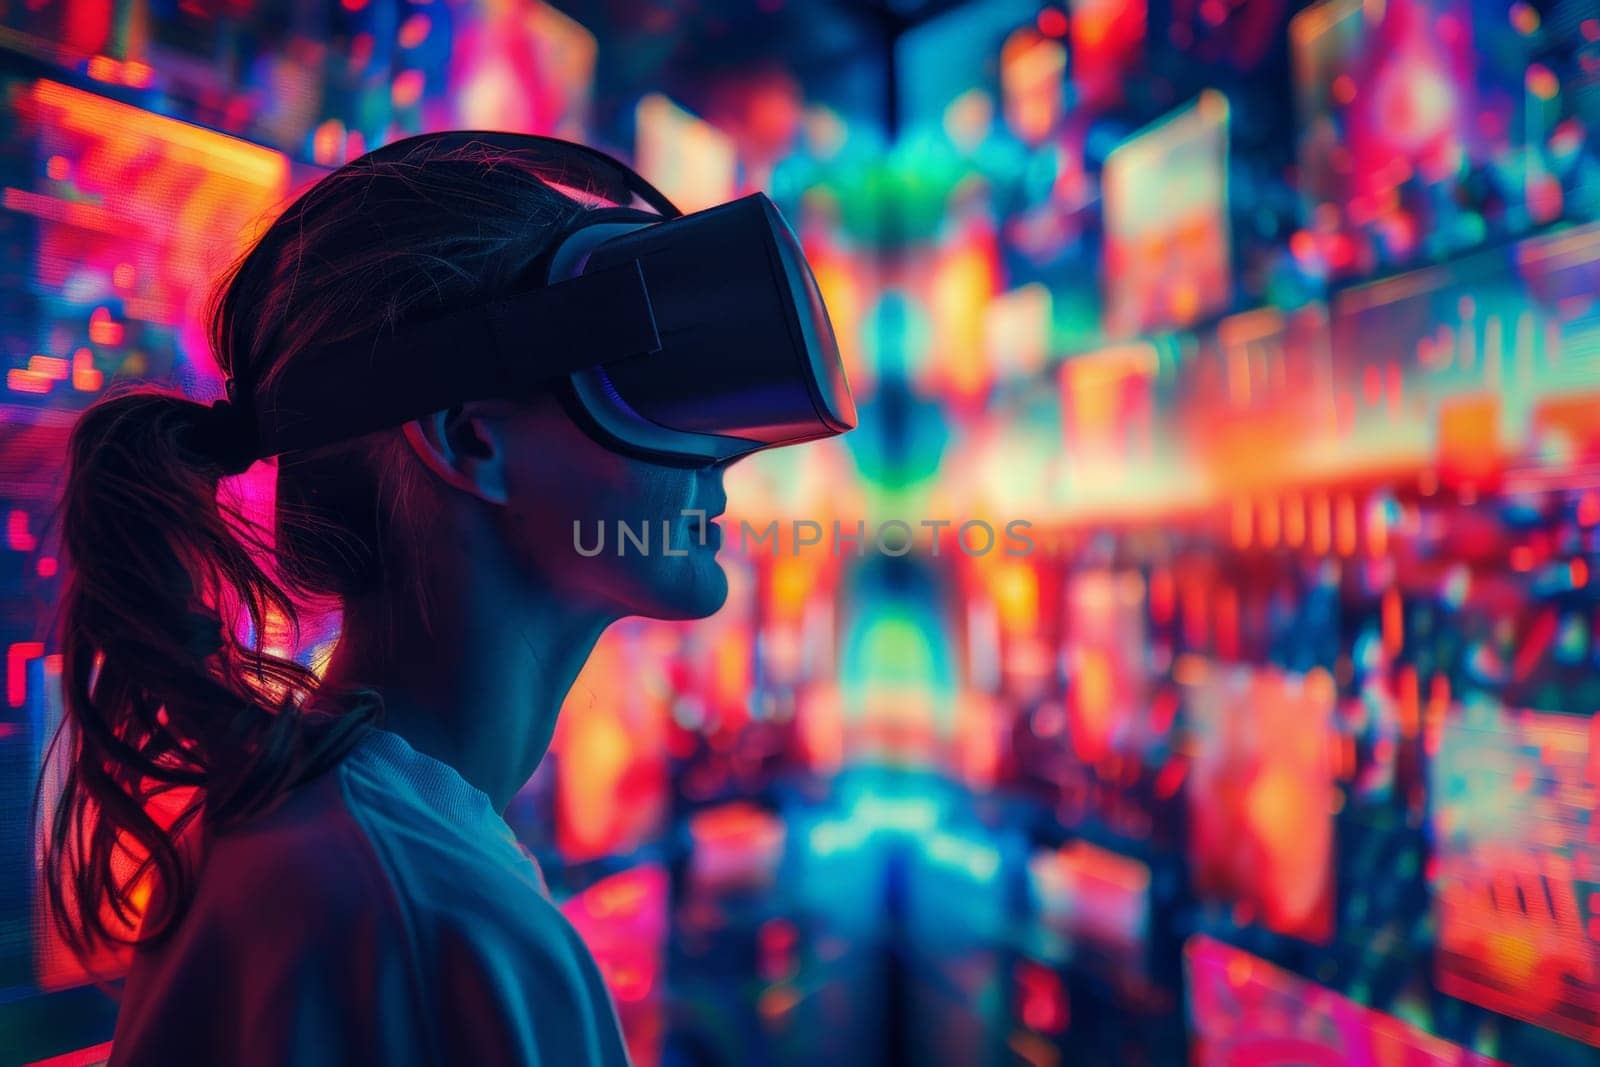 A woman wearing a virtual reality headset is looking at a colorful display. The scene is set in a room with multiple screens, creating a futuristic and immersive atmosphere